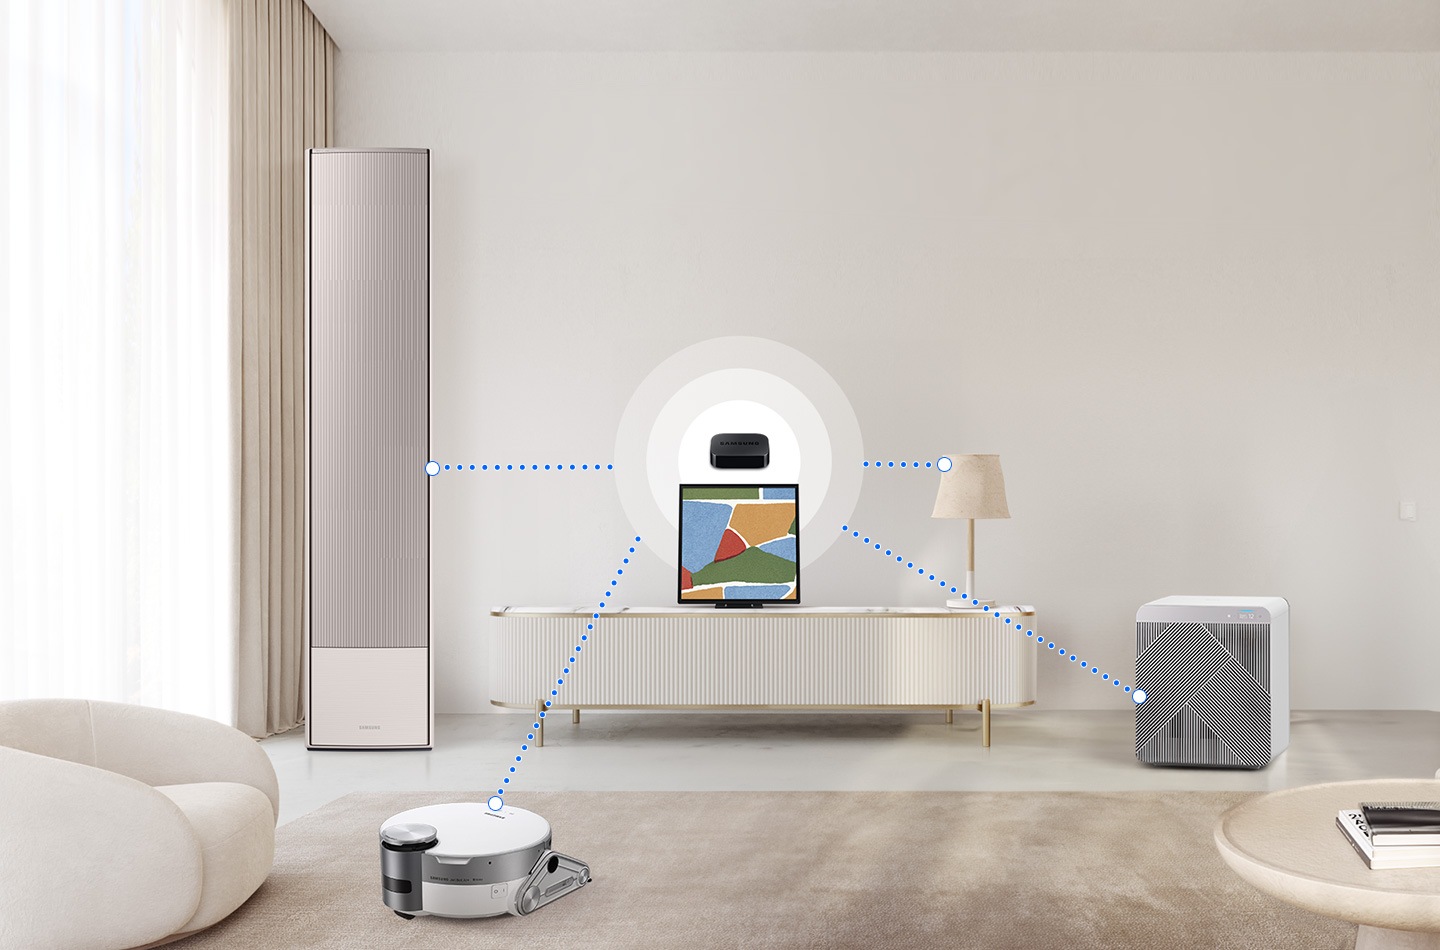 Music Frame is in a living room, with a SmartThings dongle floating over it. Dotted lines connect it to various home devices.